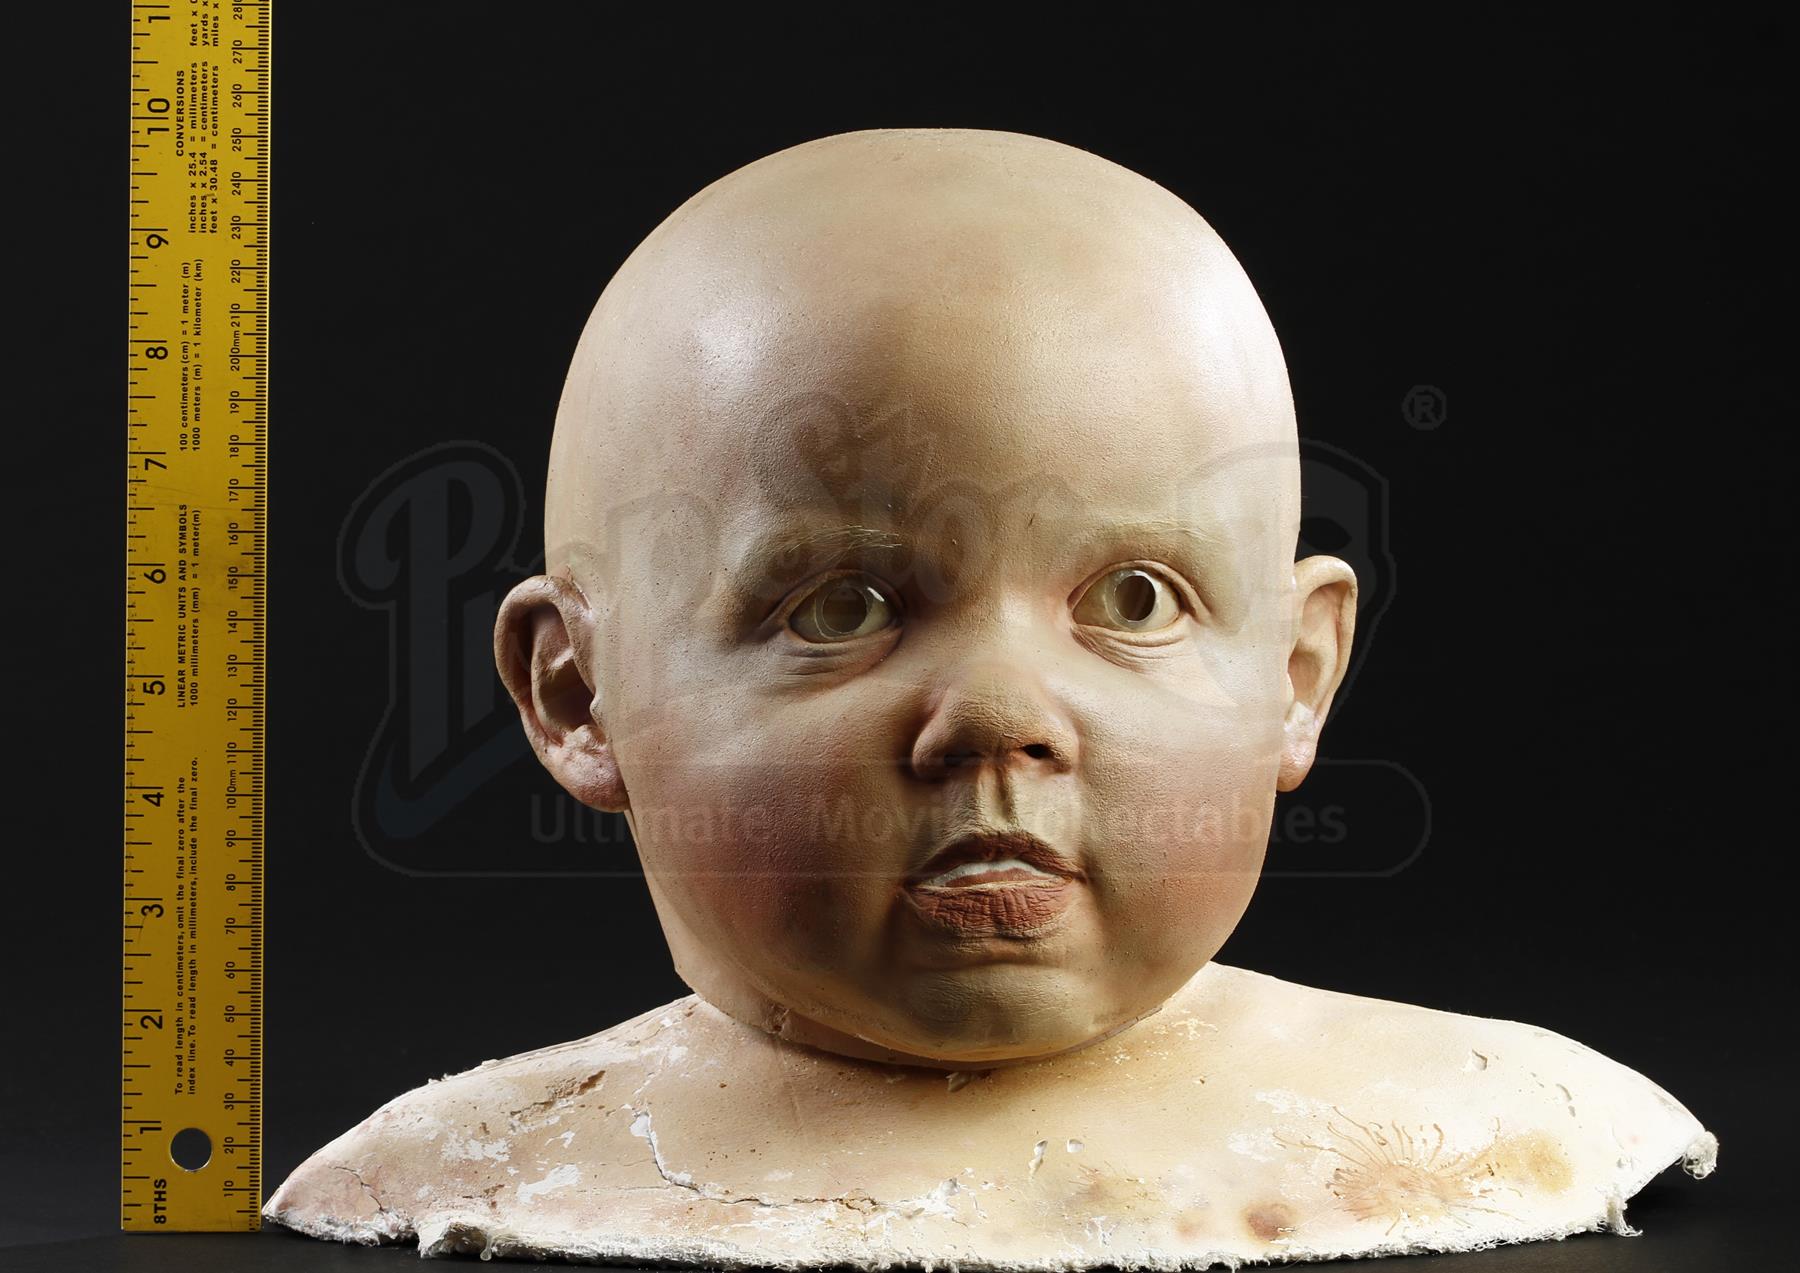 Baby S Day Out 1994 Baby Bink Vern Troyer Stunt Mask